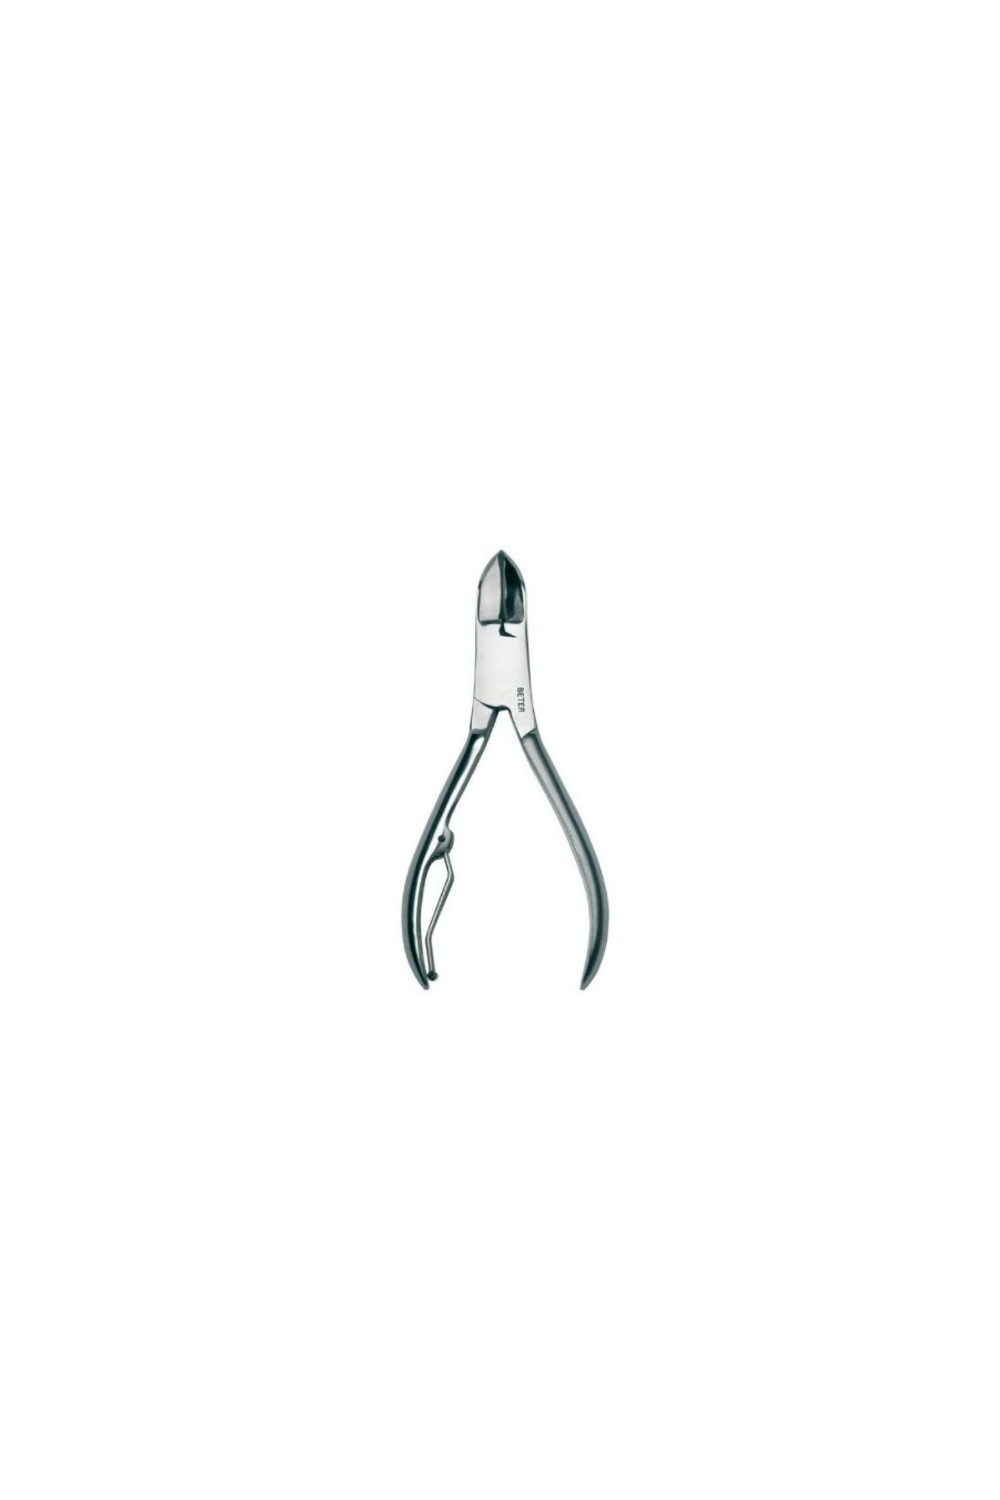 Beter Professional Nail Pliers